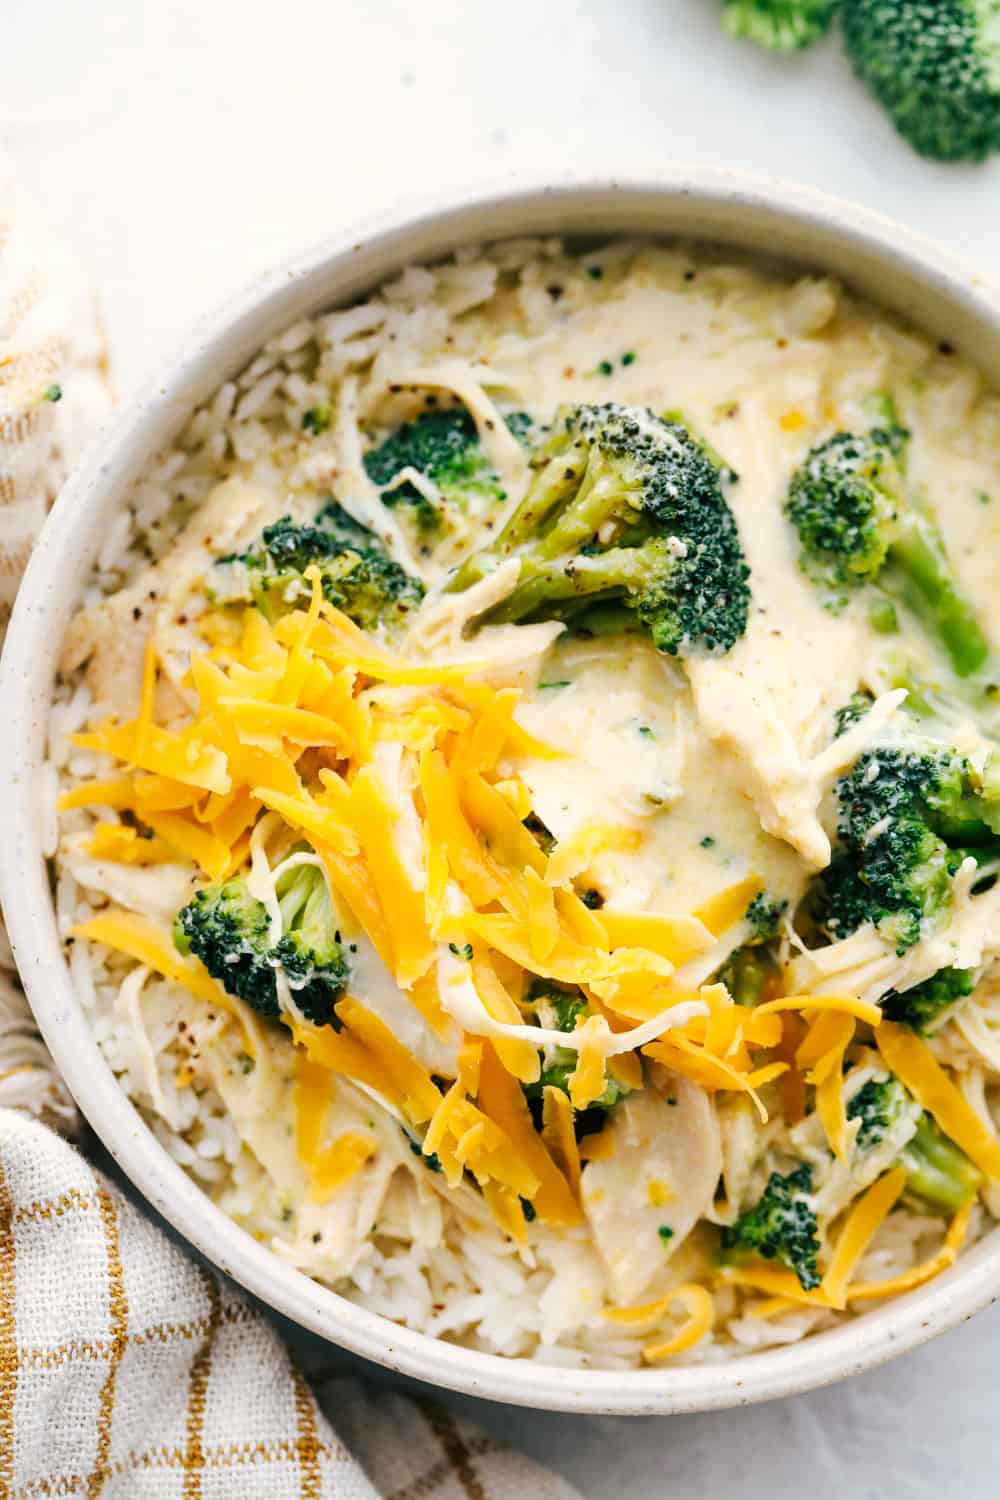 Delicious Slow Cooker Creamy Chicken and Broccoli over Rice.